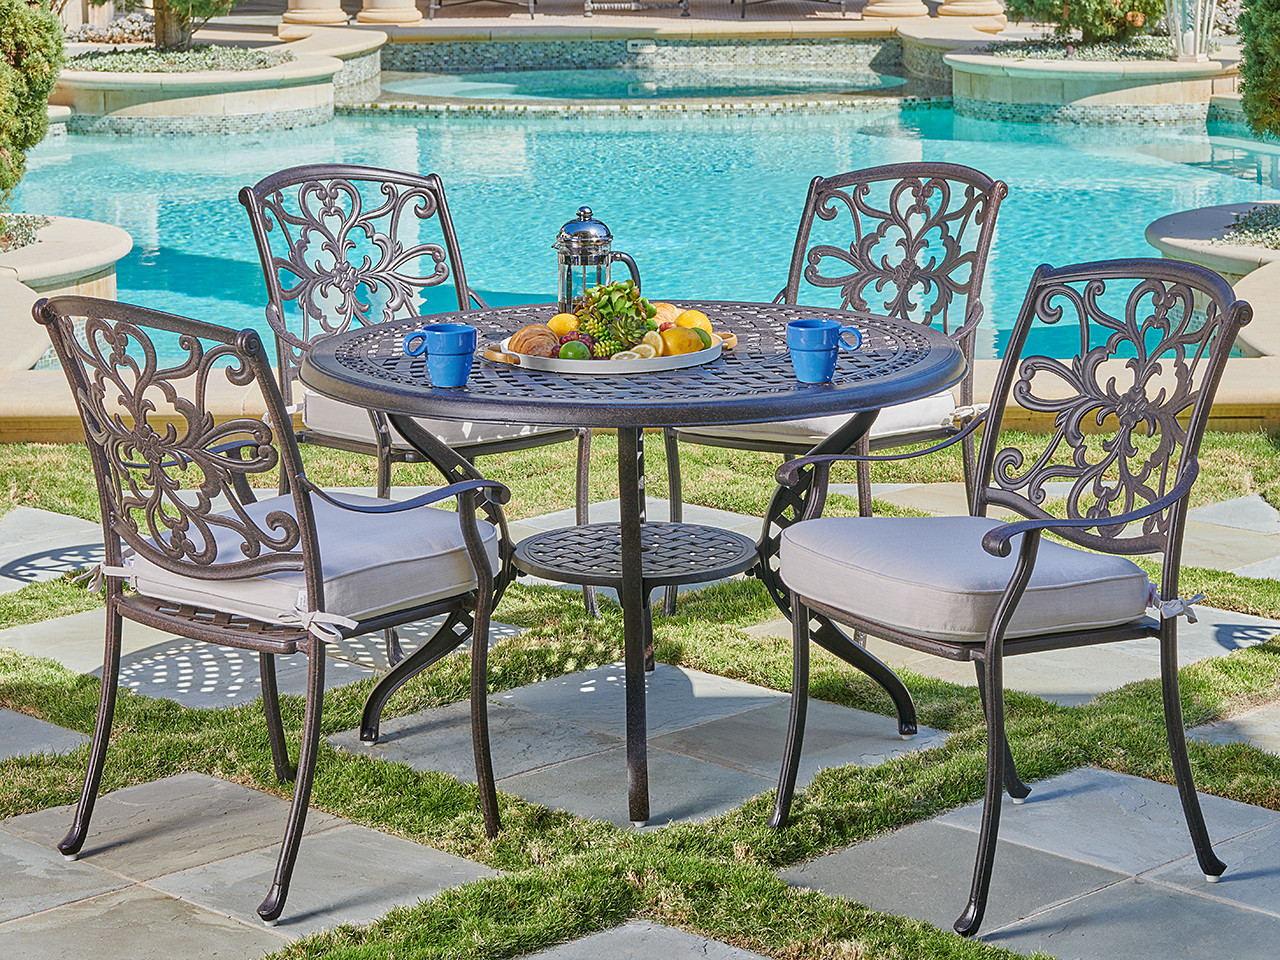 Carlisle Aged Bronze Cast Aluminum and Cast Pumice Cushion 5 Pc. Dining Set with 48 in. D Table